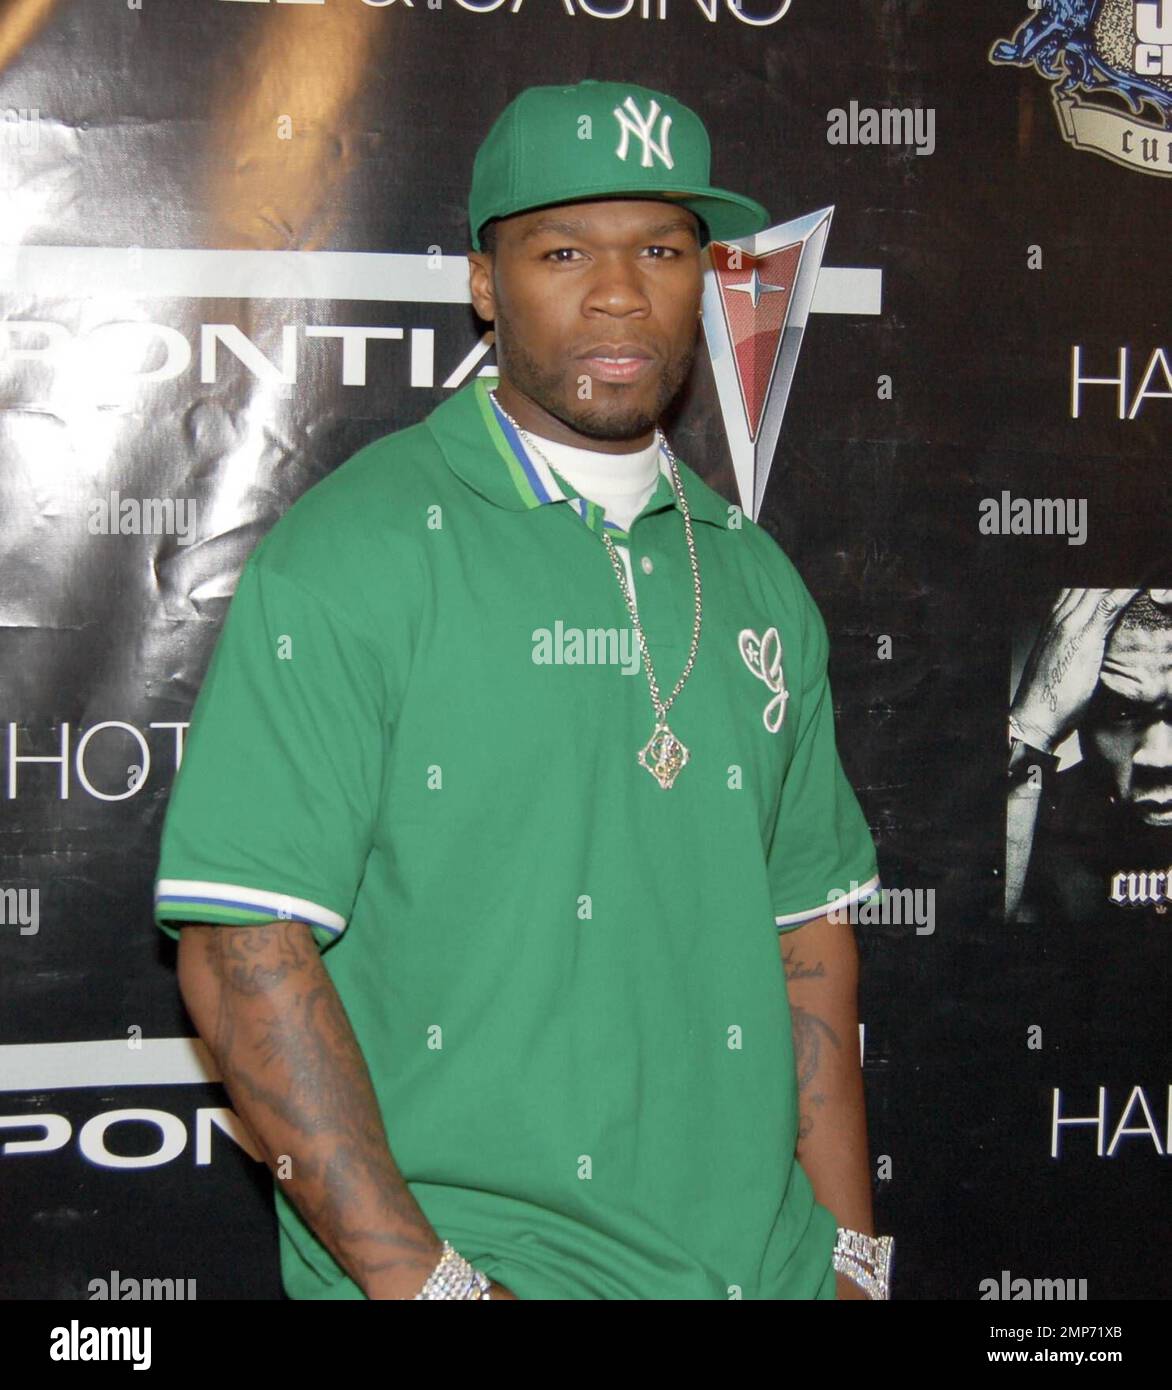 50 Cent walks the red carpet at Pontiac Presents 50 Cent performance,  poolside at the Hard Rock Hotel. Las Vegas, NV. 9/8/07 Stock Photo - Alamy